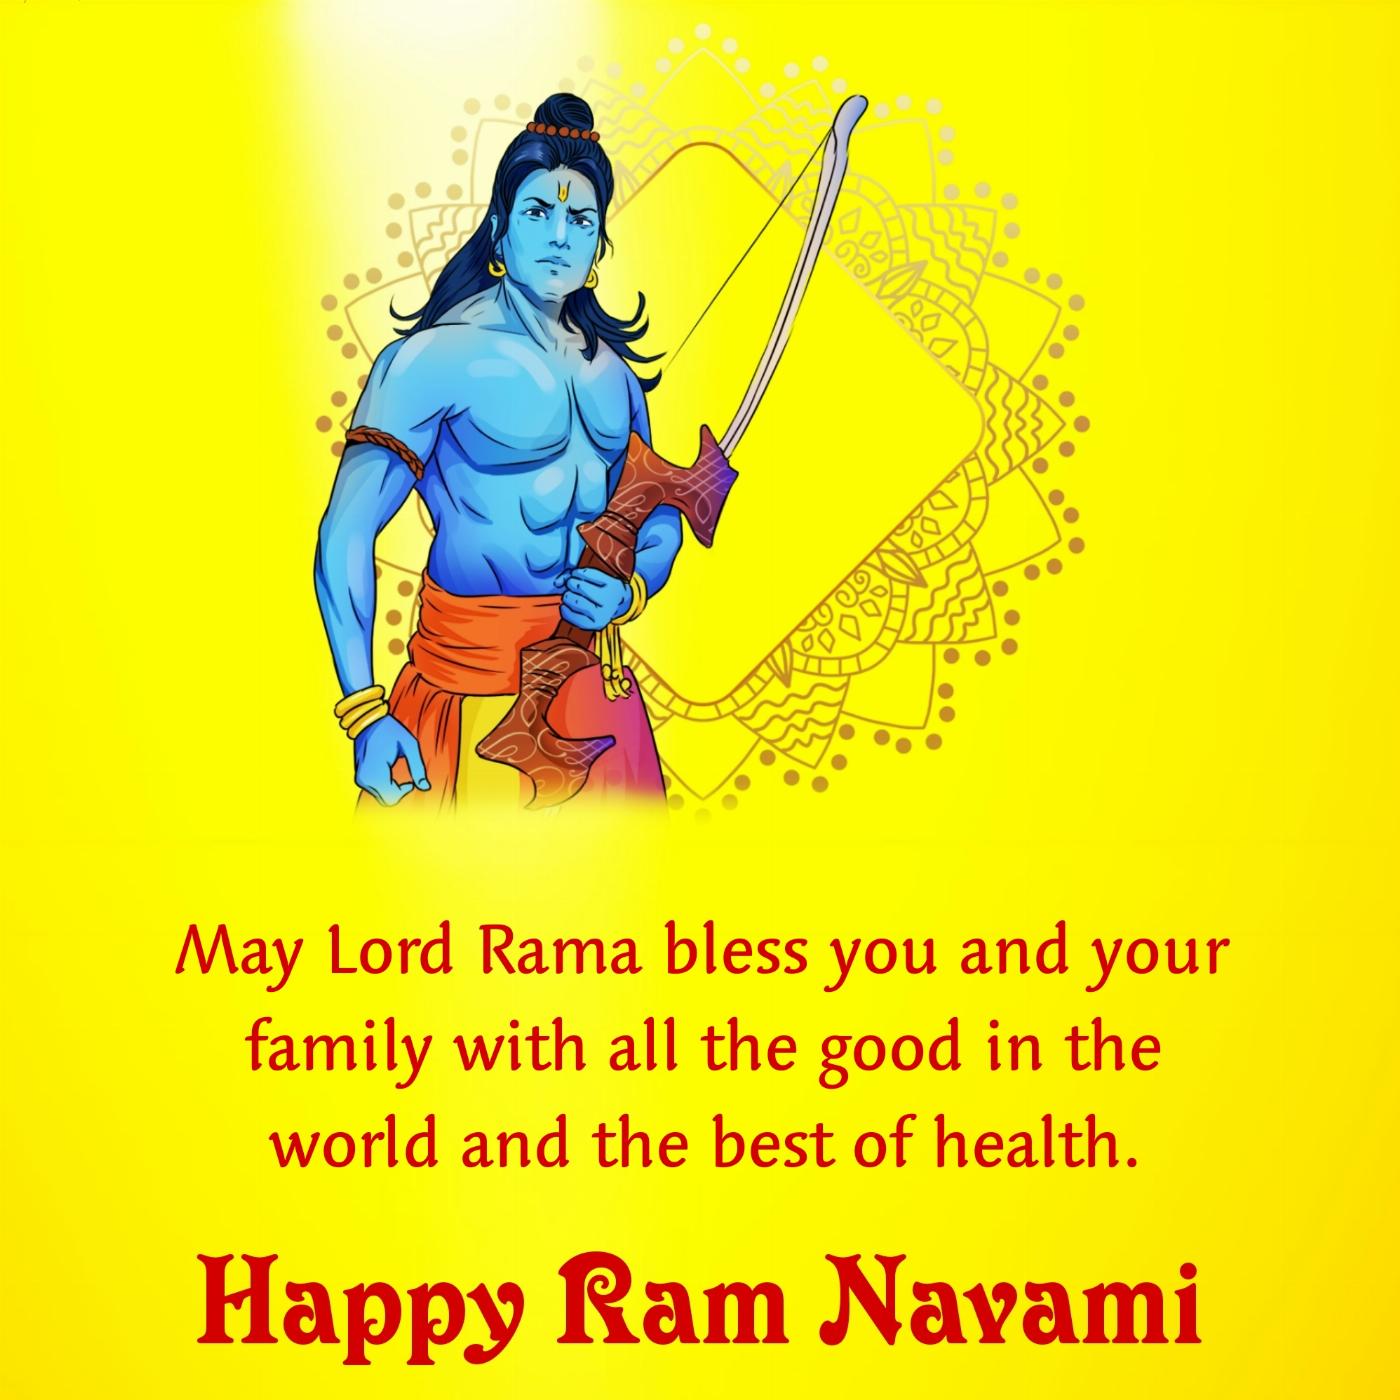 May Lord Rama bless you and your family with all the good